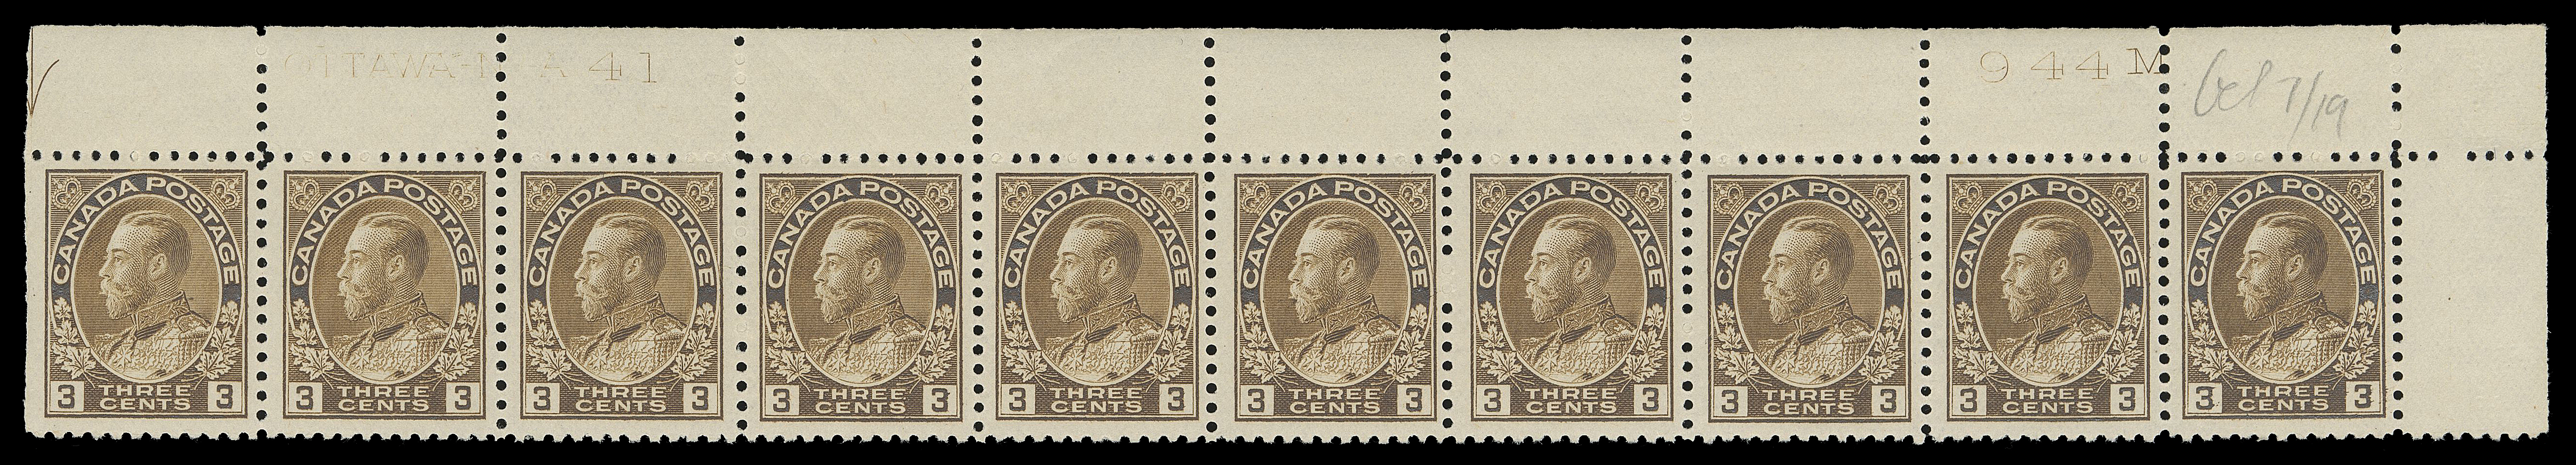 ADMIRAL STAMPS  108b,Matching upper right Plate 41 & 42 strips of ten in the distinctive scarcer, visually striking shade, reasonably centered, both LH on straight edged stamp, leaving nine NH in each, F-VF; pencil "Oct 7 / 19" date of acquisition. (Unitrade cat. $2,105)